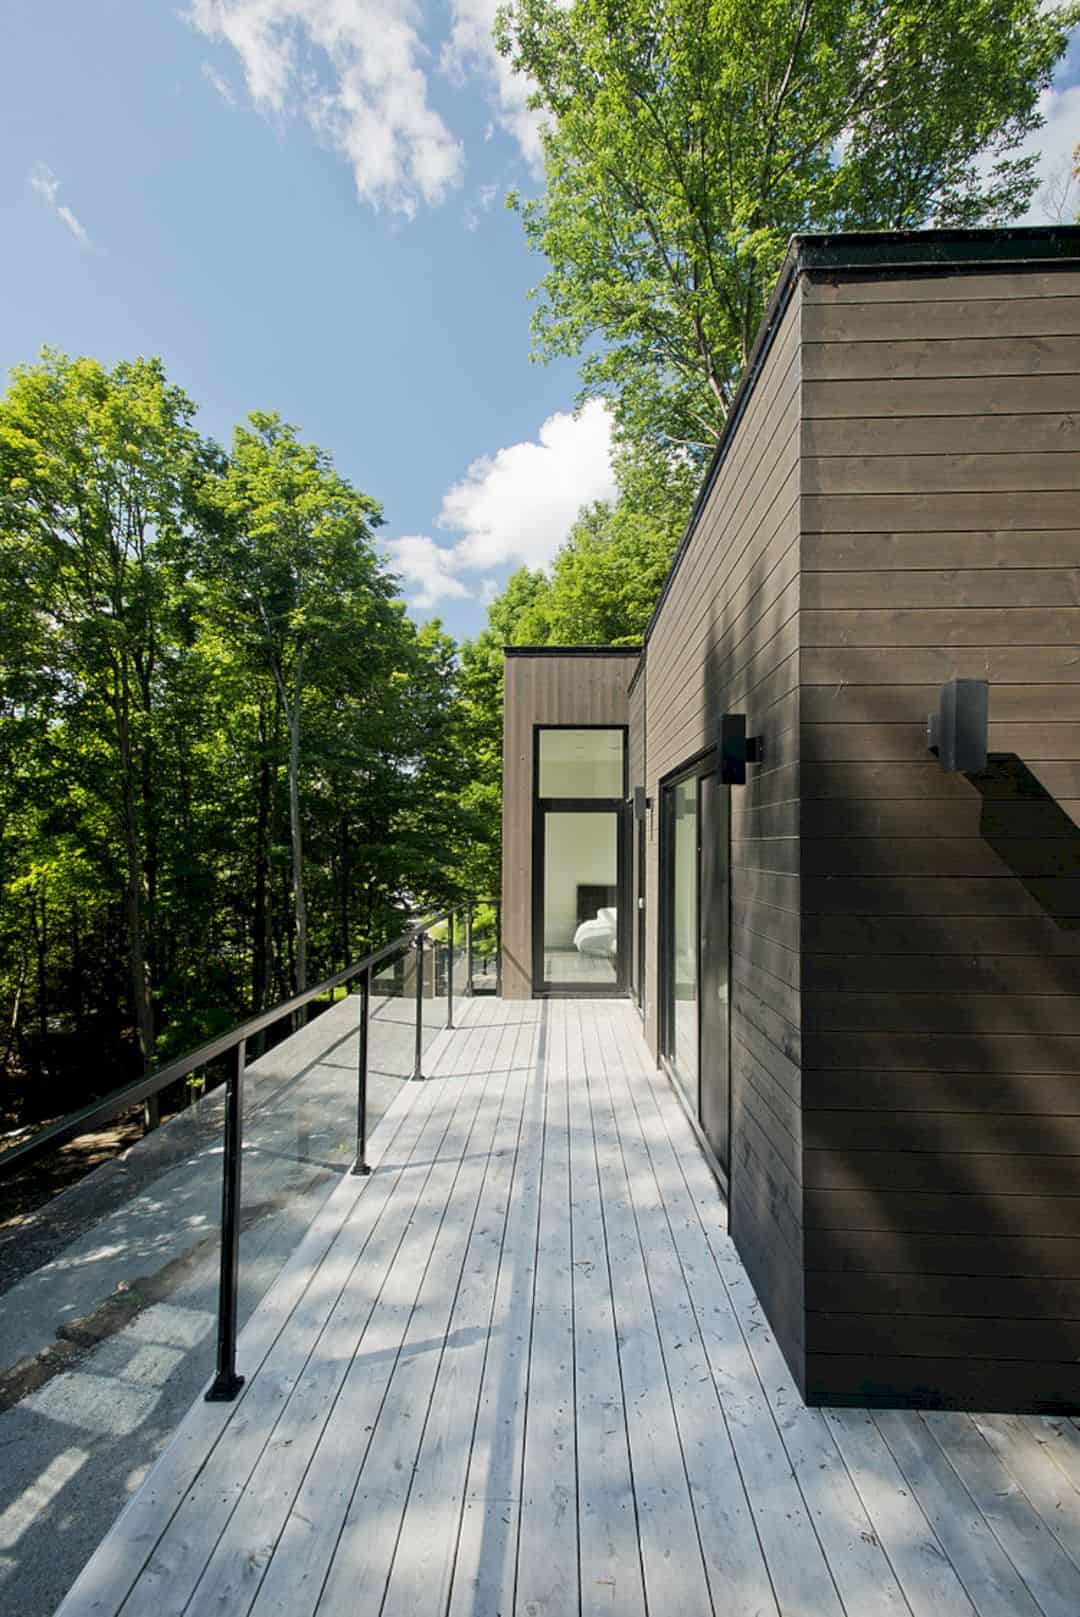 Chalet Lac Champlain A Contemporary Cottage Acting As Observation Post On Natural Settings 5